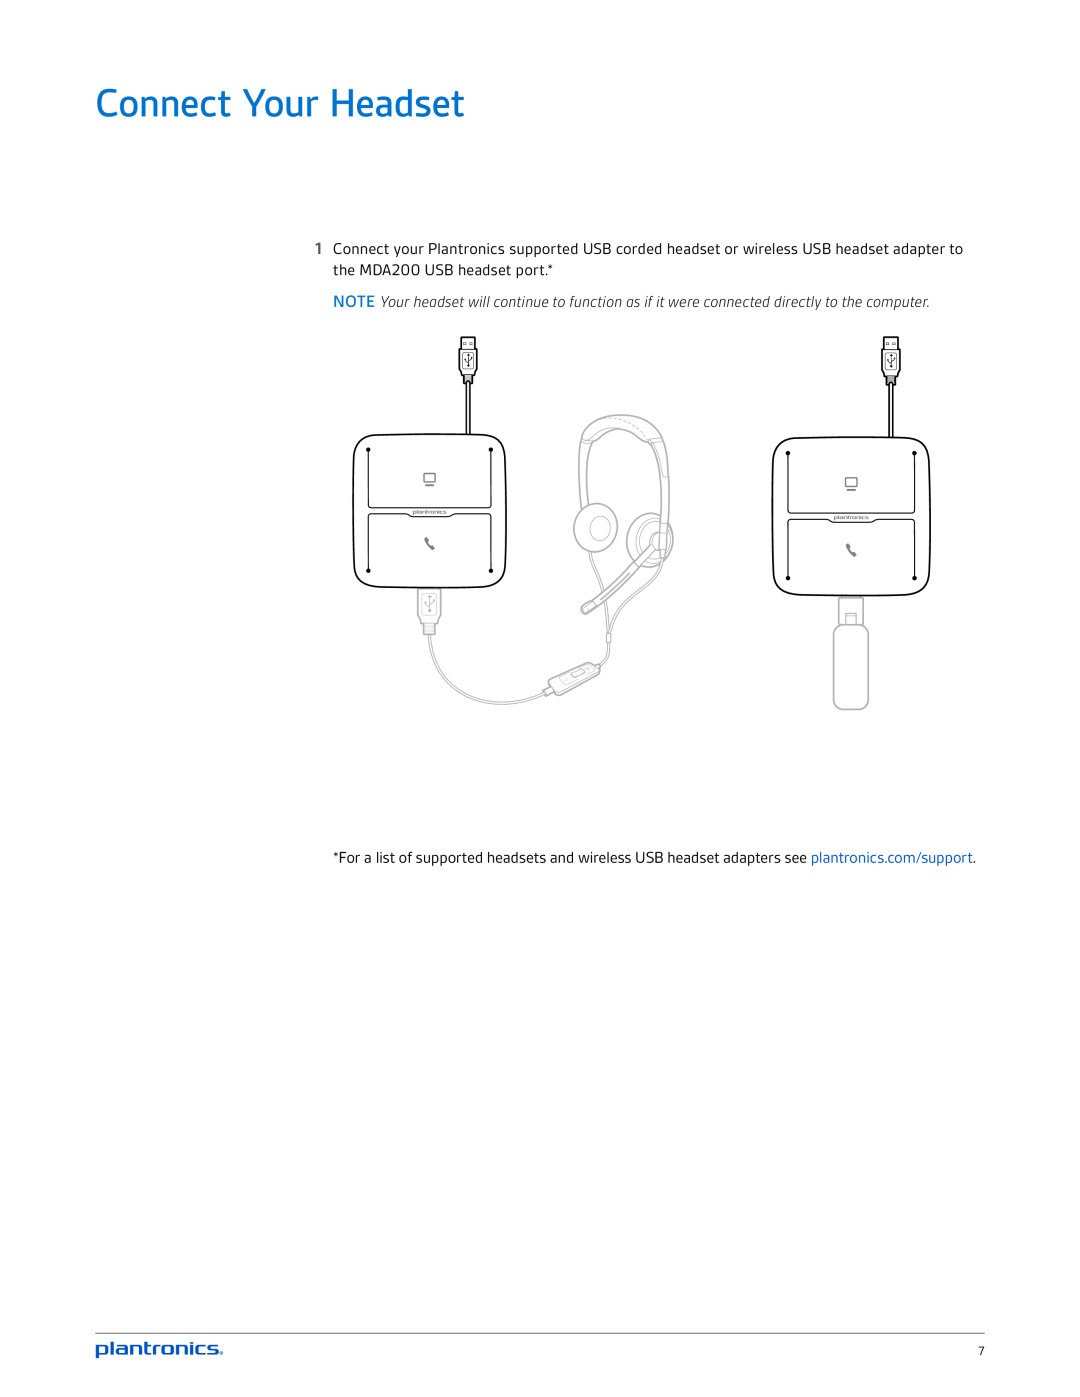 Plantronics mda200 manual Connect Your Headset 